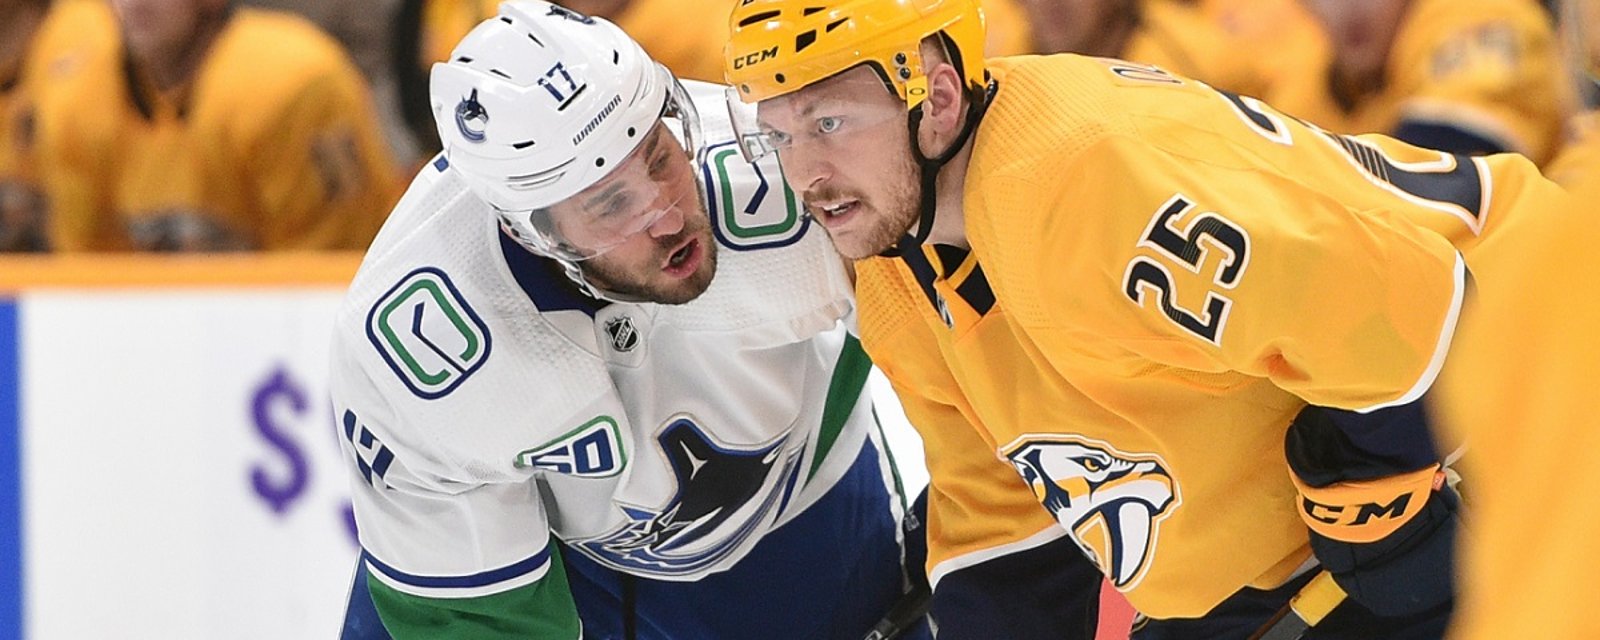 Canucks announce Josh Leivo out months due to serious injury.